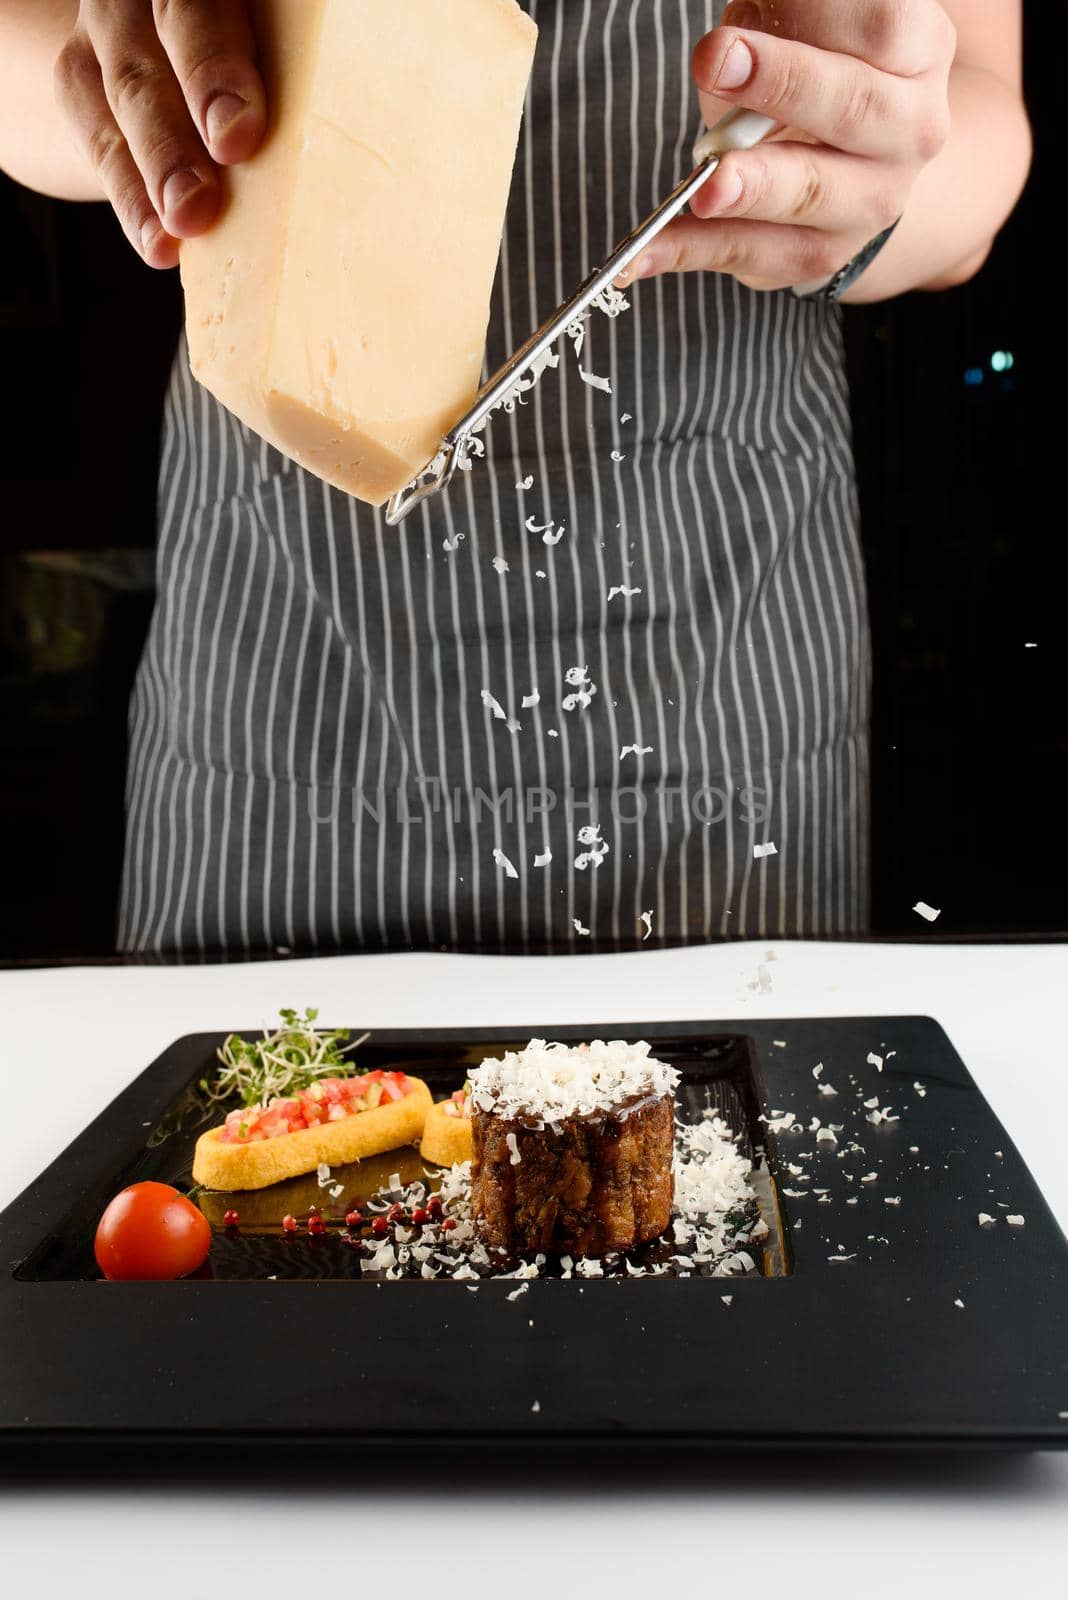 Сhef grates cheese on a gourmet restaurant dish with meat and vegetables on a black square plate, by Rabizo